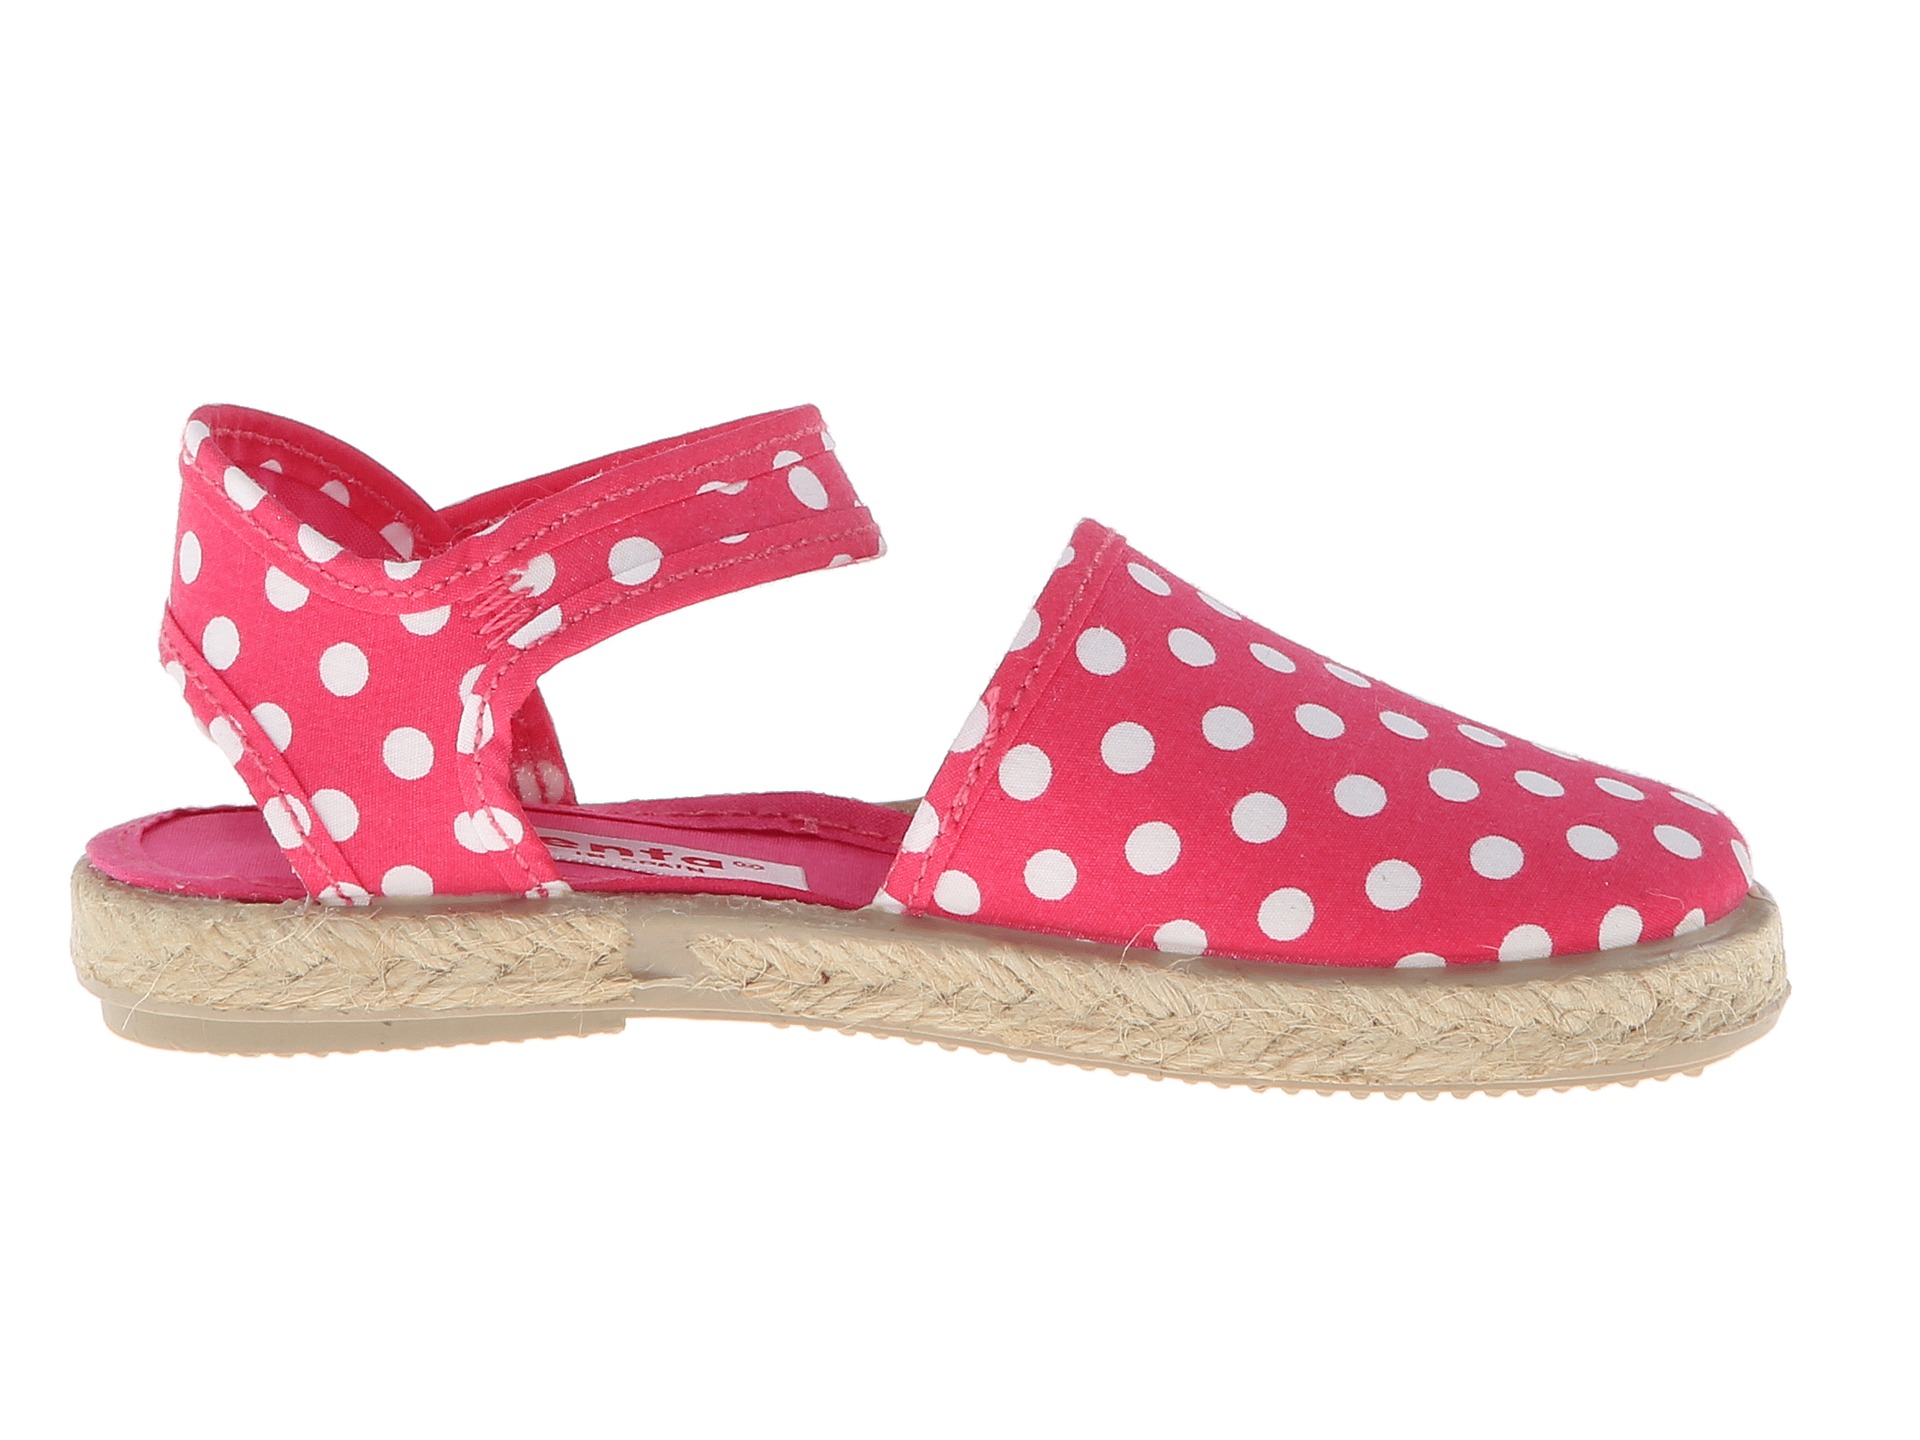 Cienta Kids Shoes 40088 Toddler Little Kid | Shipped Free at Zappos